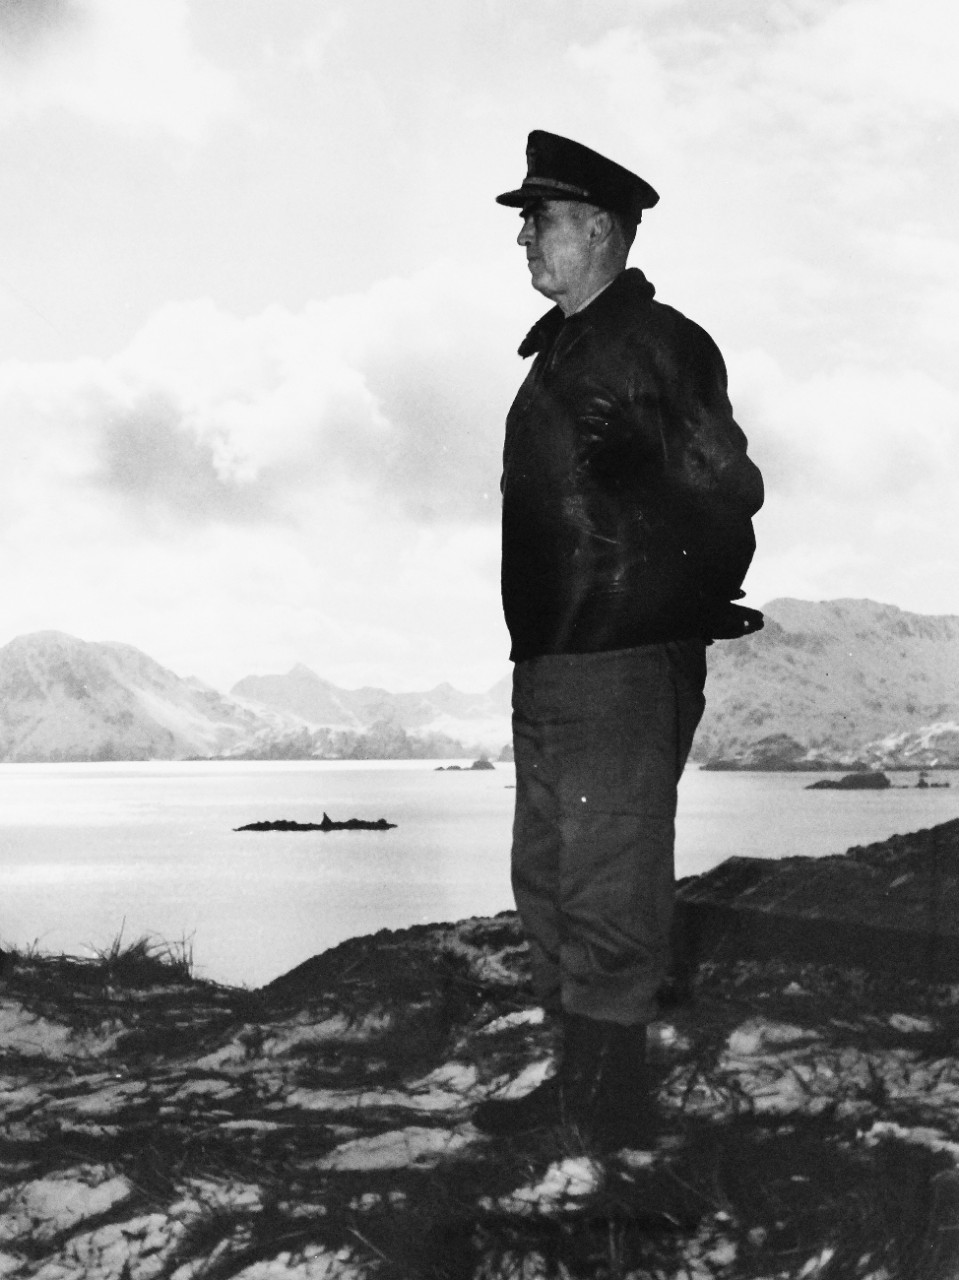 LC-Lot-803-20:  Aleutian Islands Campaign, June 1942 - August 1943.   Vice Admiral Thomas C. Kinkaid, USN, Commander, North Pacific Force, looks out over Kuluk Bay from the store of Adak Island in the Aleutians, where an American advance base is located.   Photograph released June 4, 1943.  Photographed through Mylar sleeve. Courtesy of the Library of Congress.    (2015/11/06).